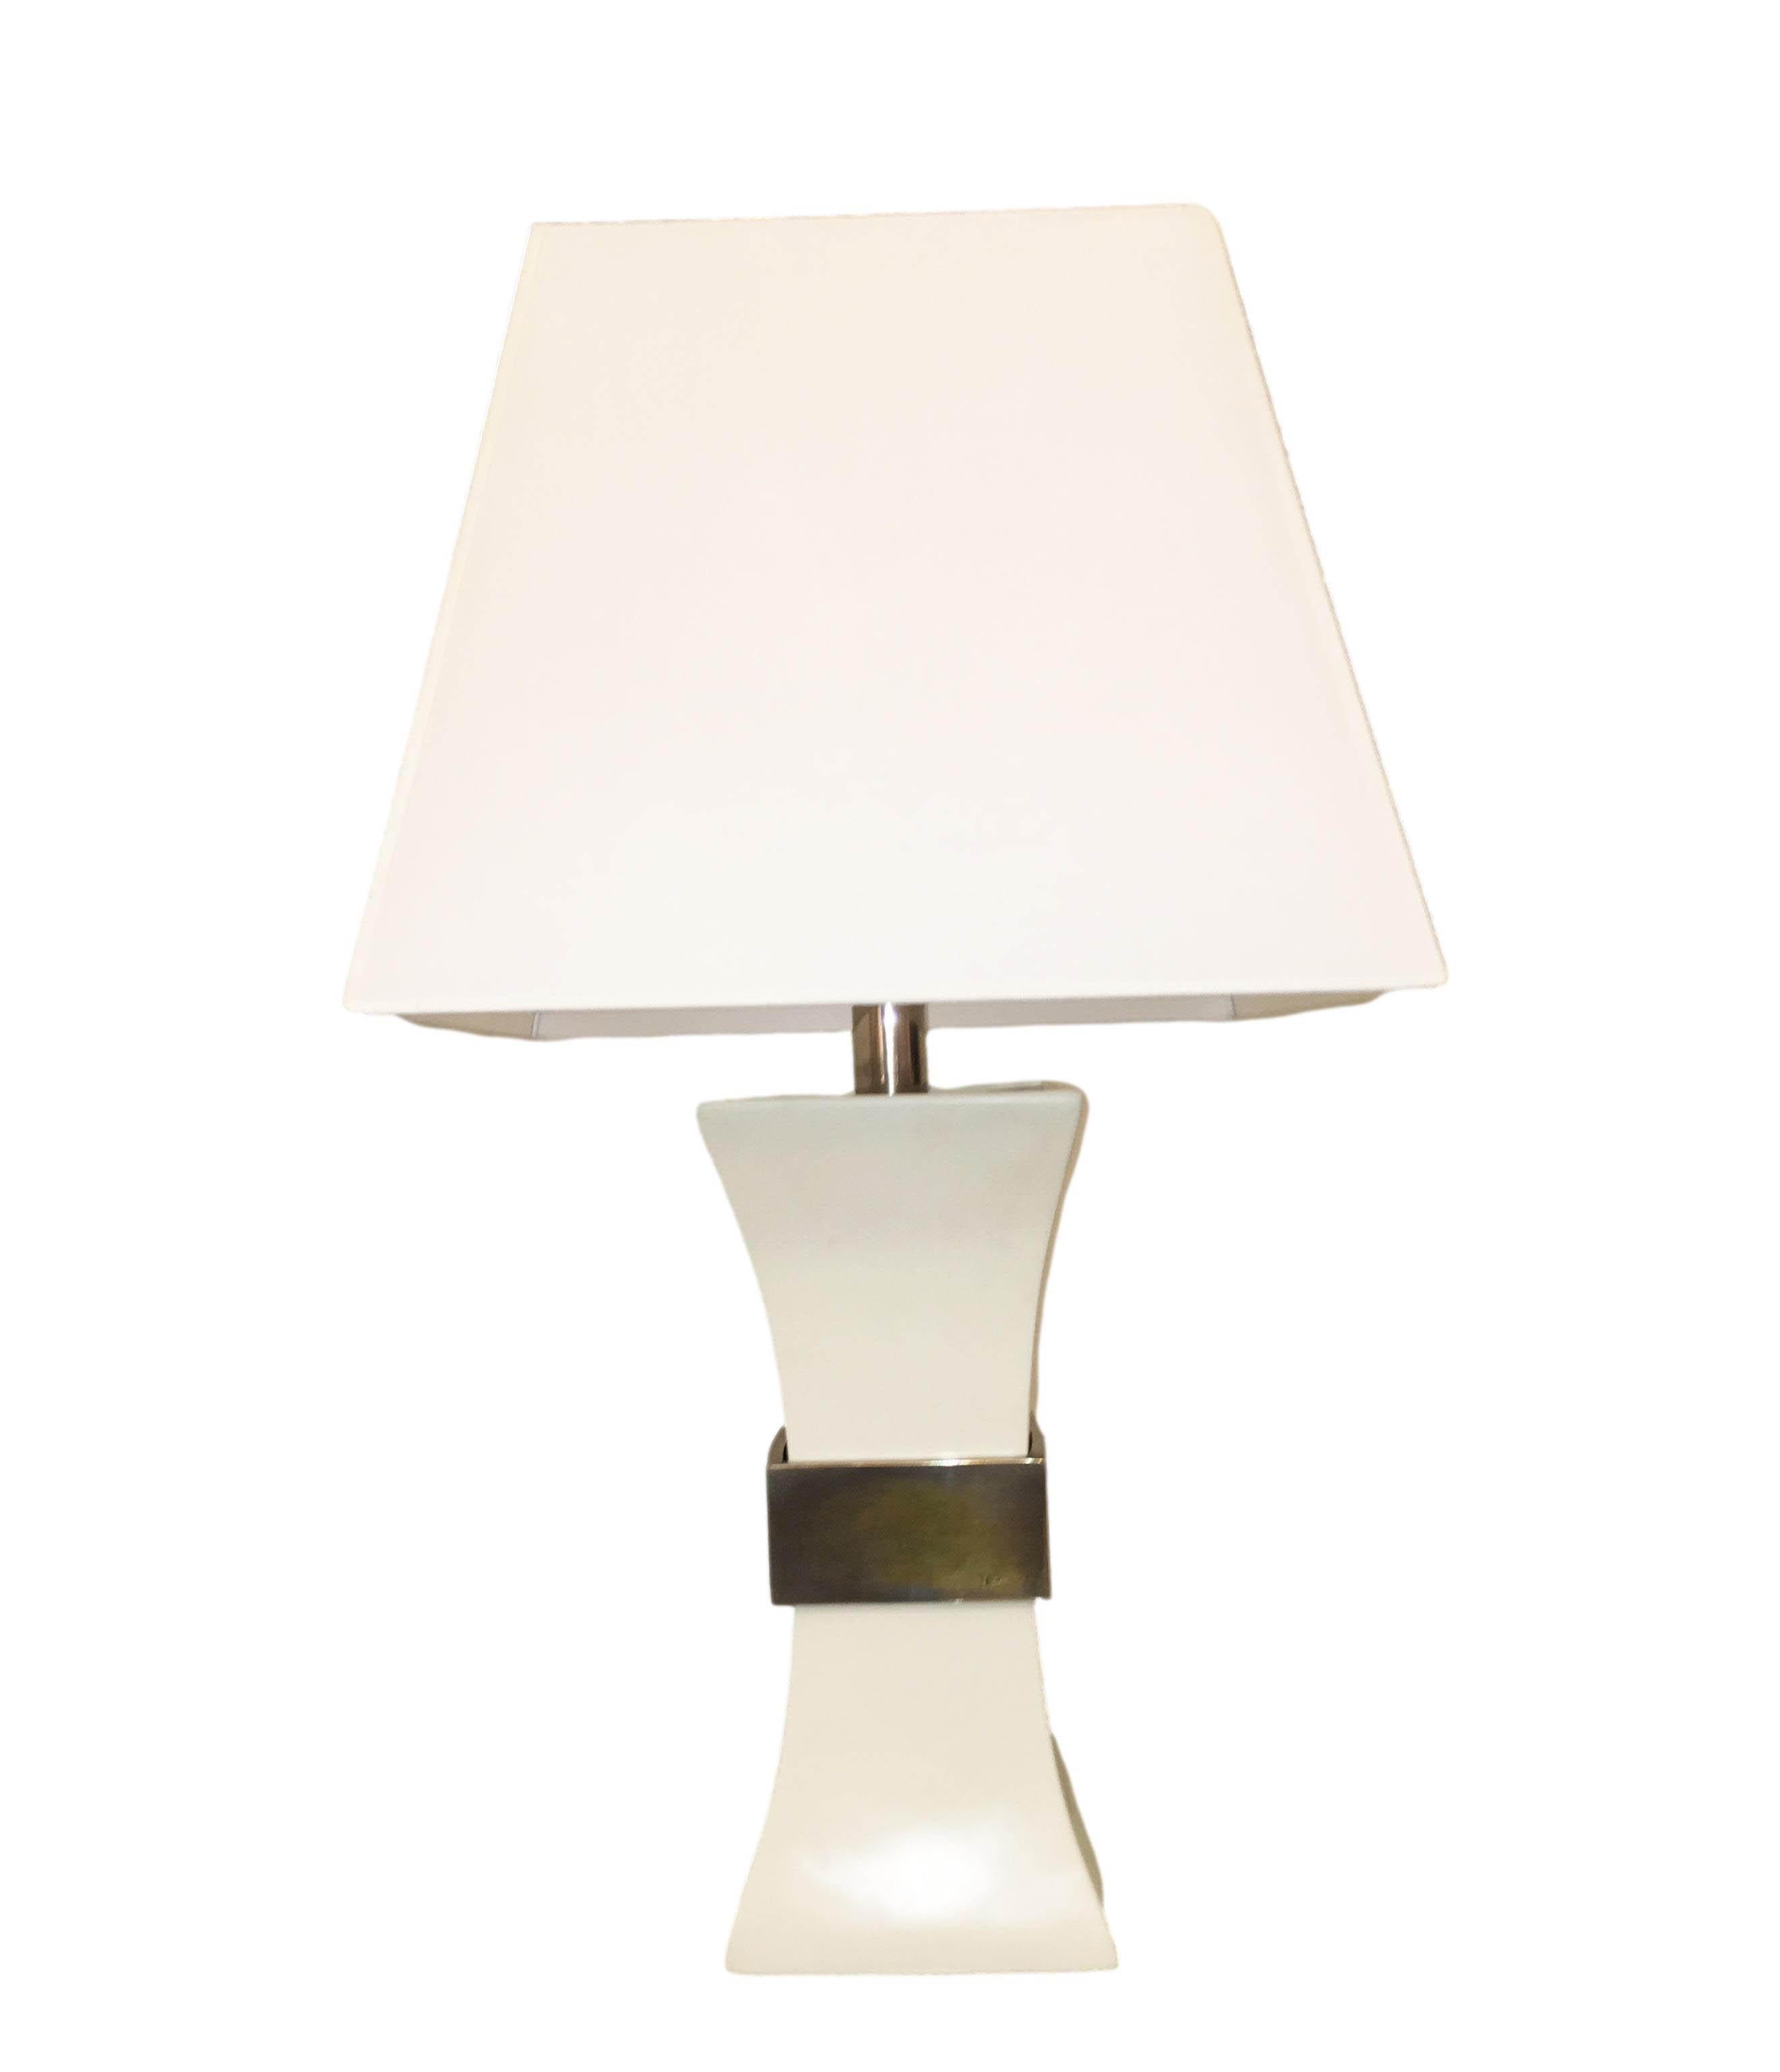 Gabriella Crespi Table Lamp in Ceramic and Golden Brass, 1970s, Italy In Good Condition For Sale In Naples, IT